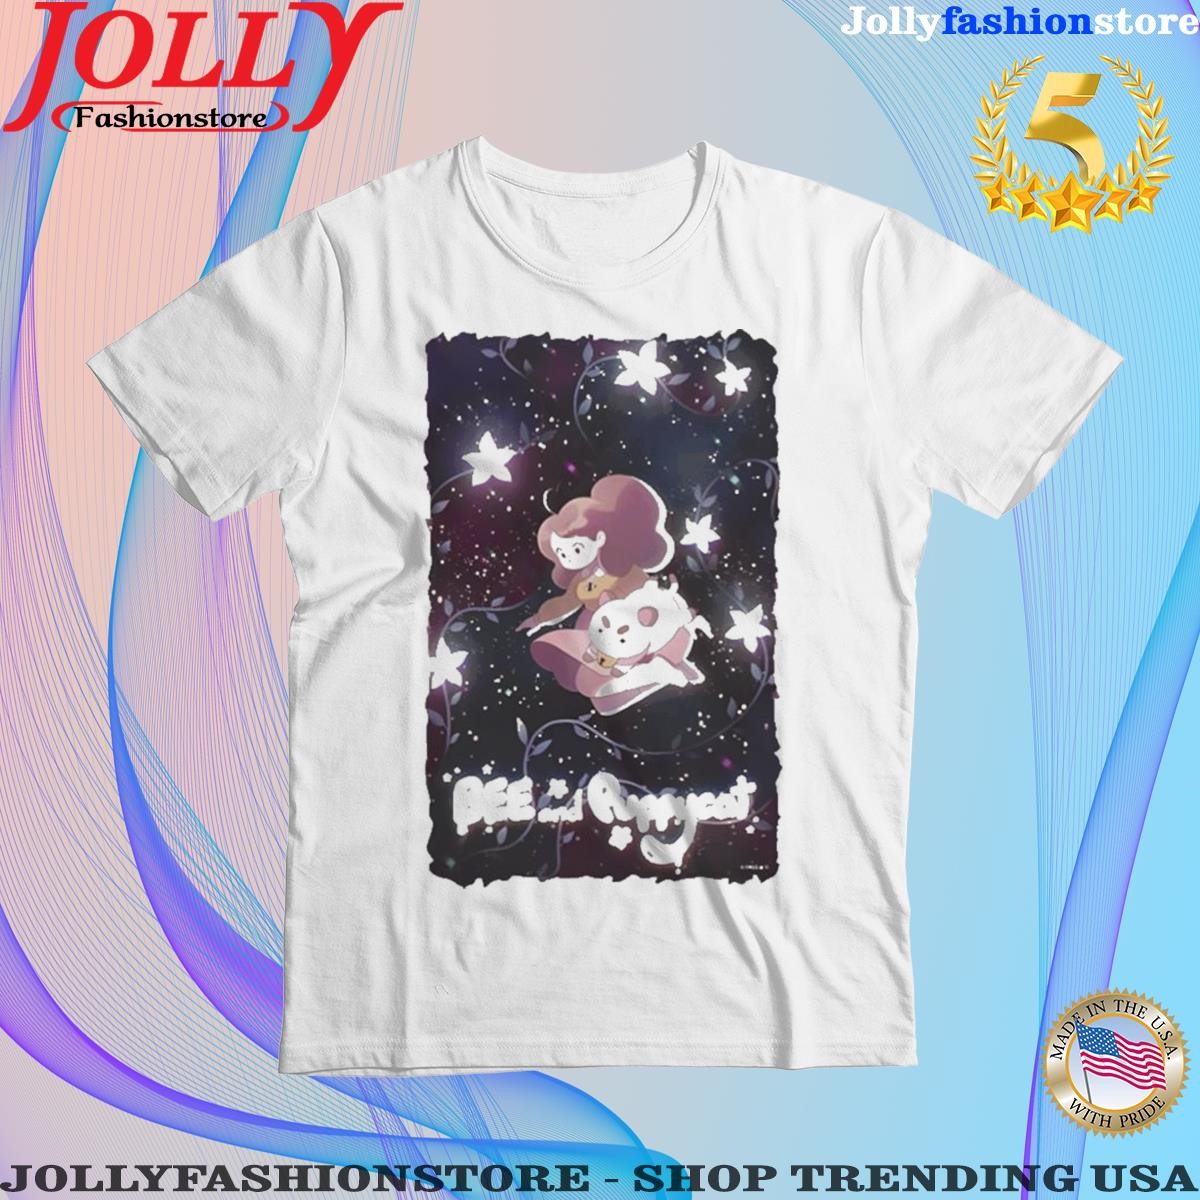 Bee and puppycat space flowers poster mineral wash shirt